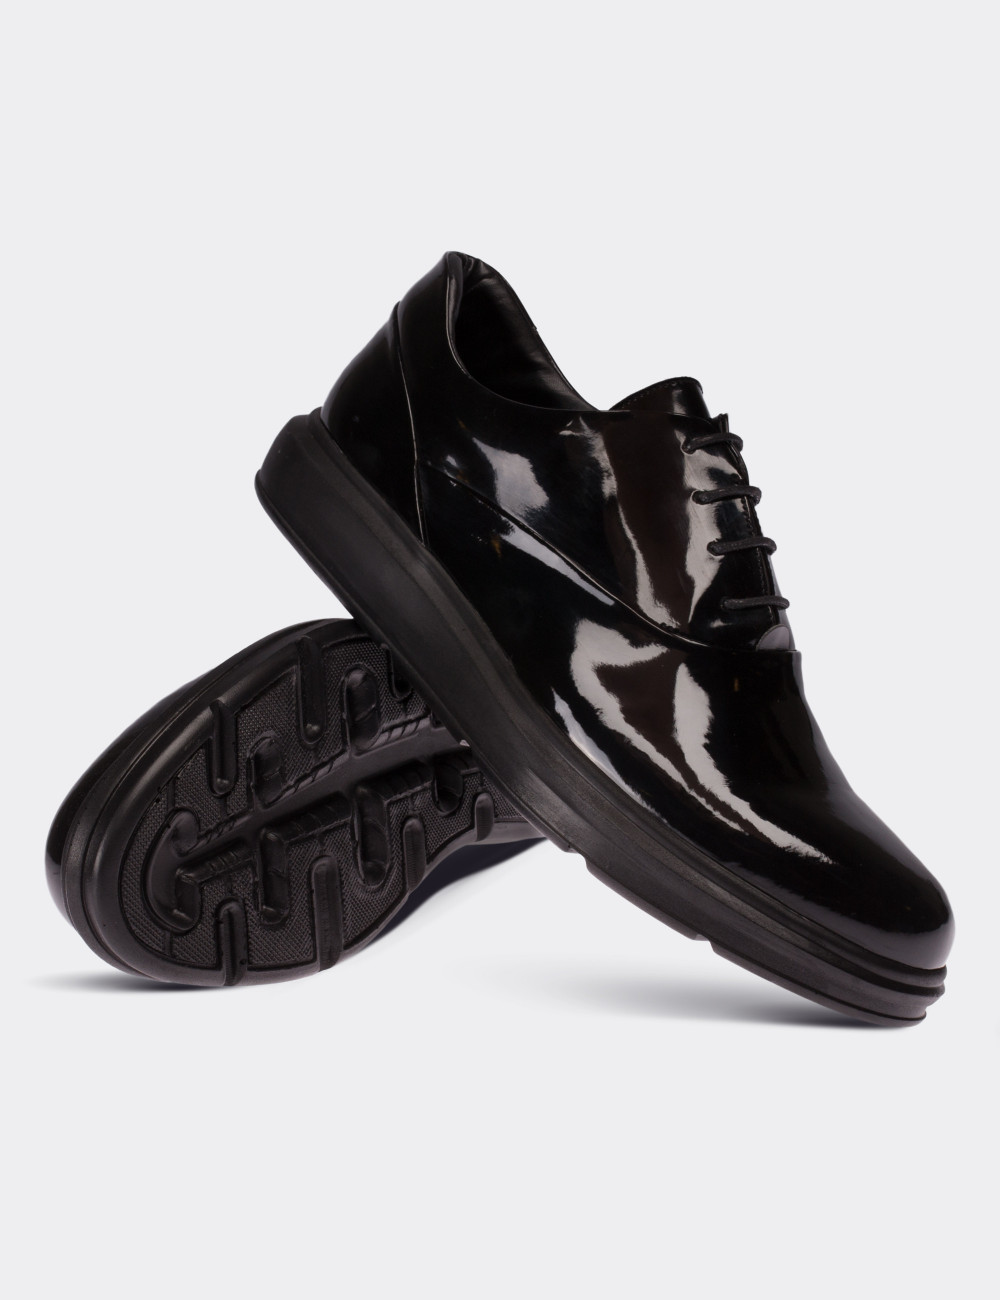 Black Patent Leather Lace-up Shoes - Deery